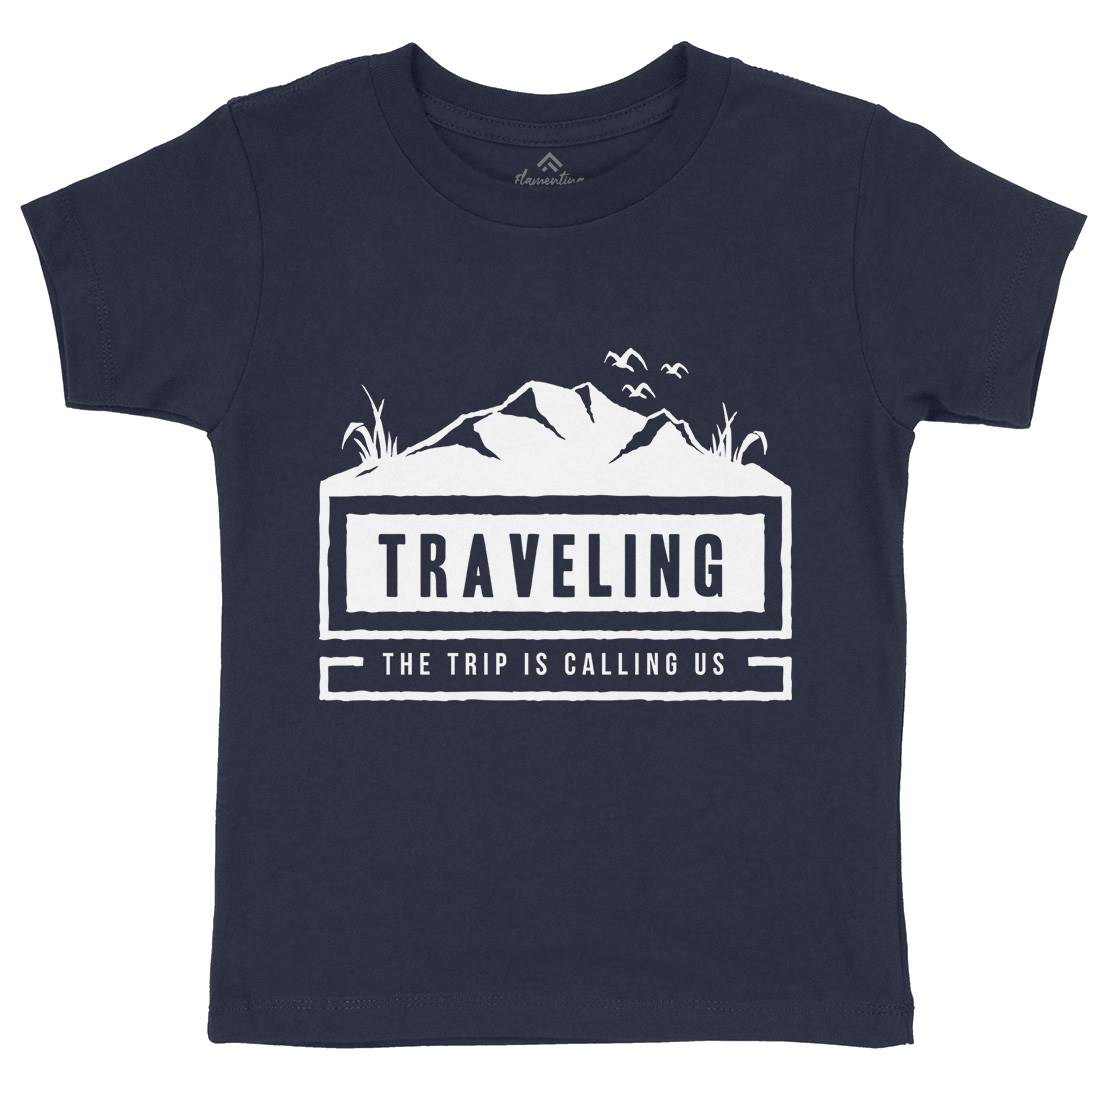 Traveling Outdoor Kids Crew Neck T-Shirt Nature A389